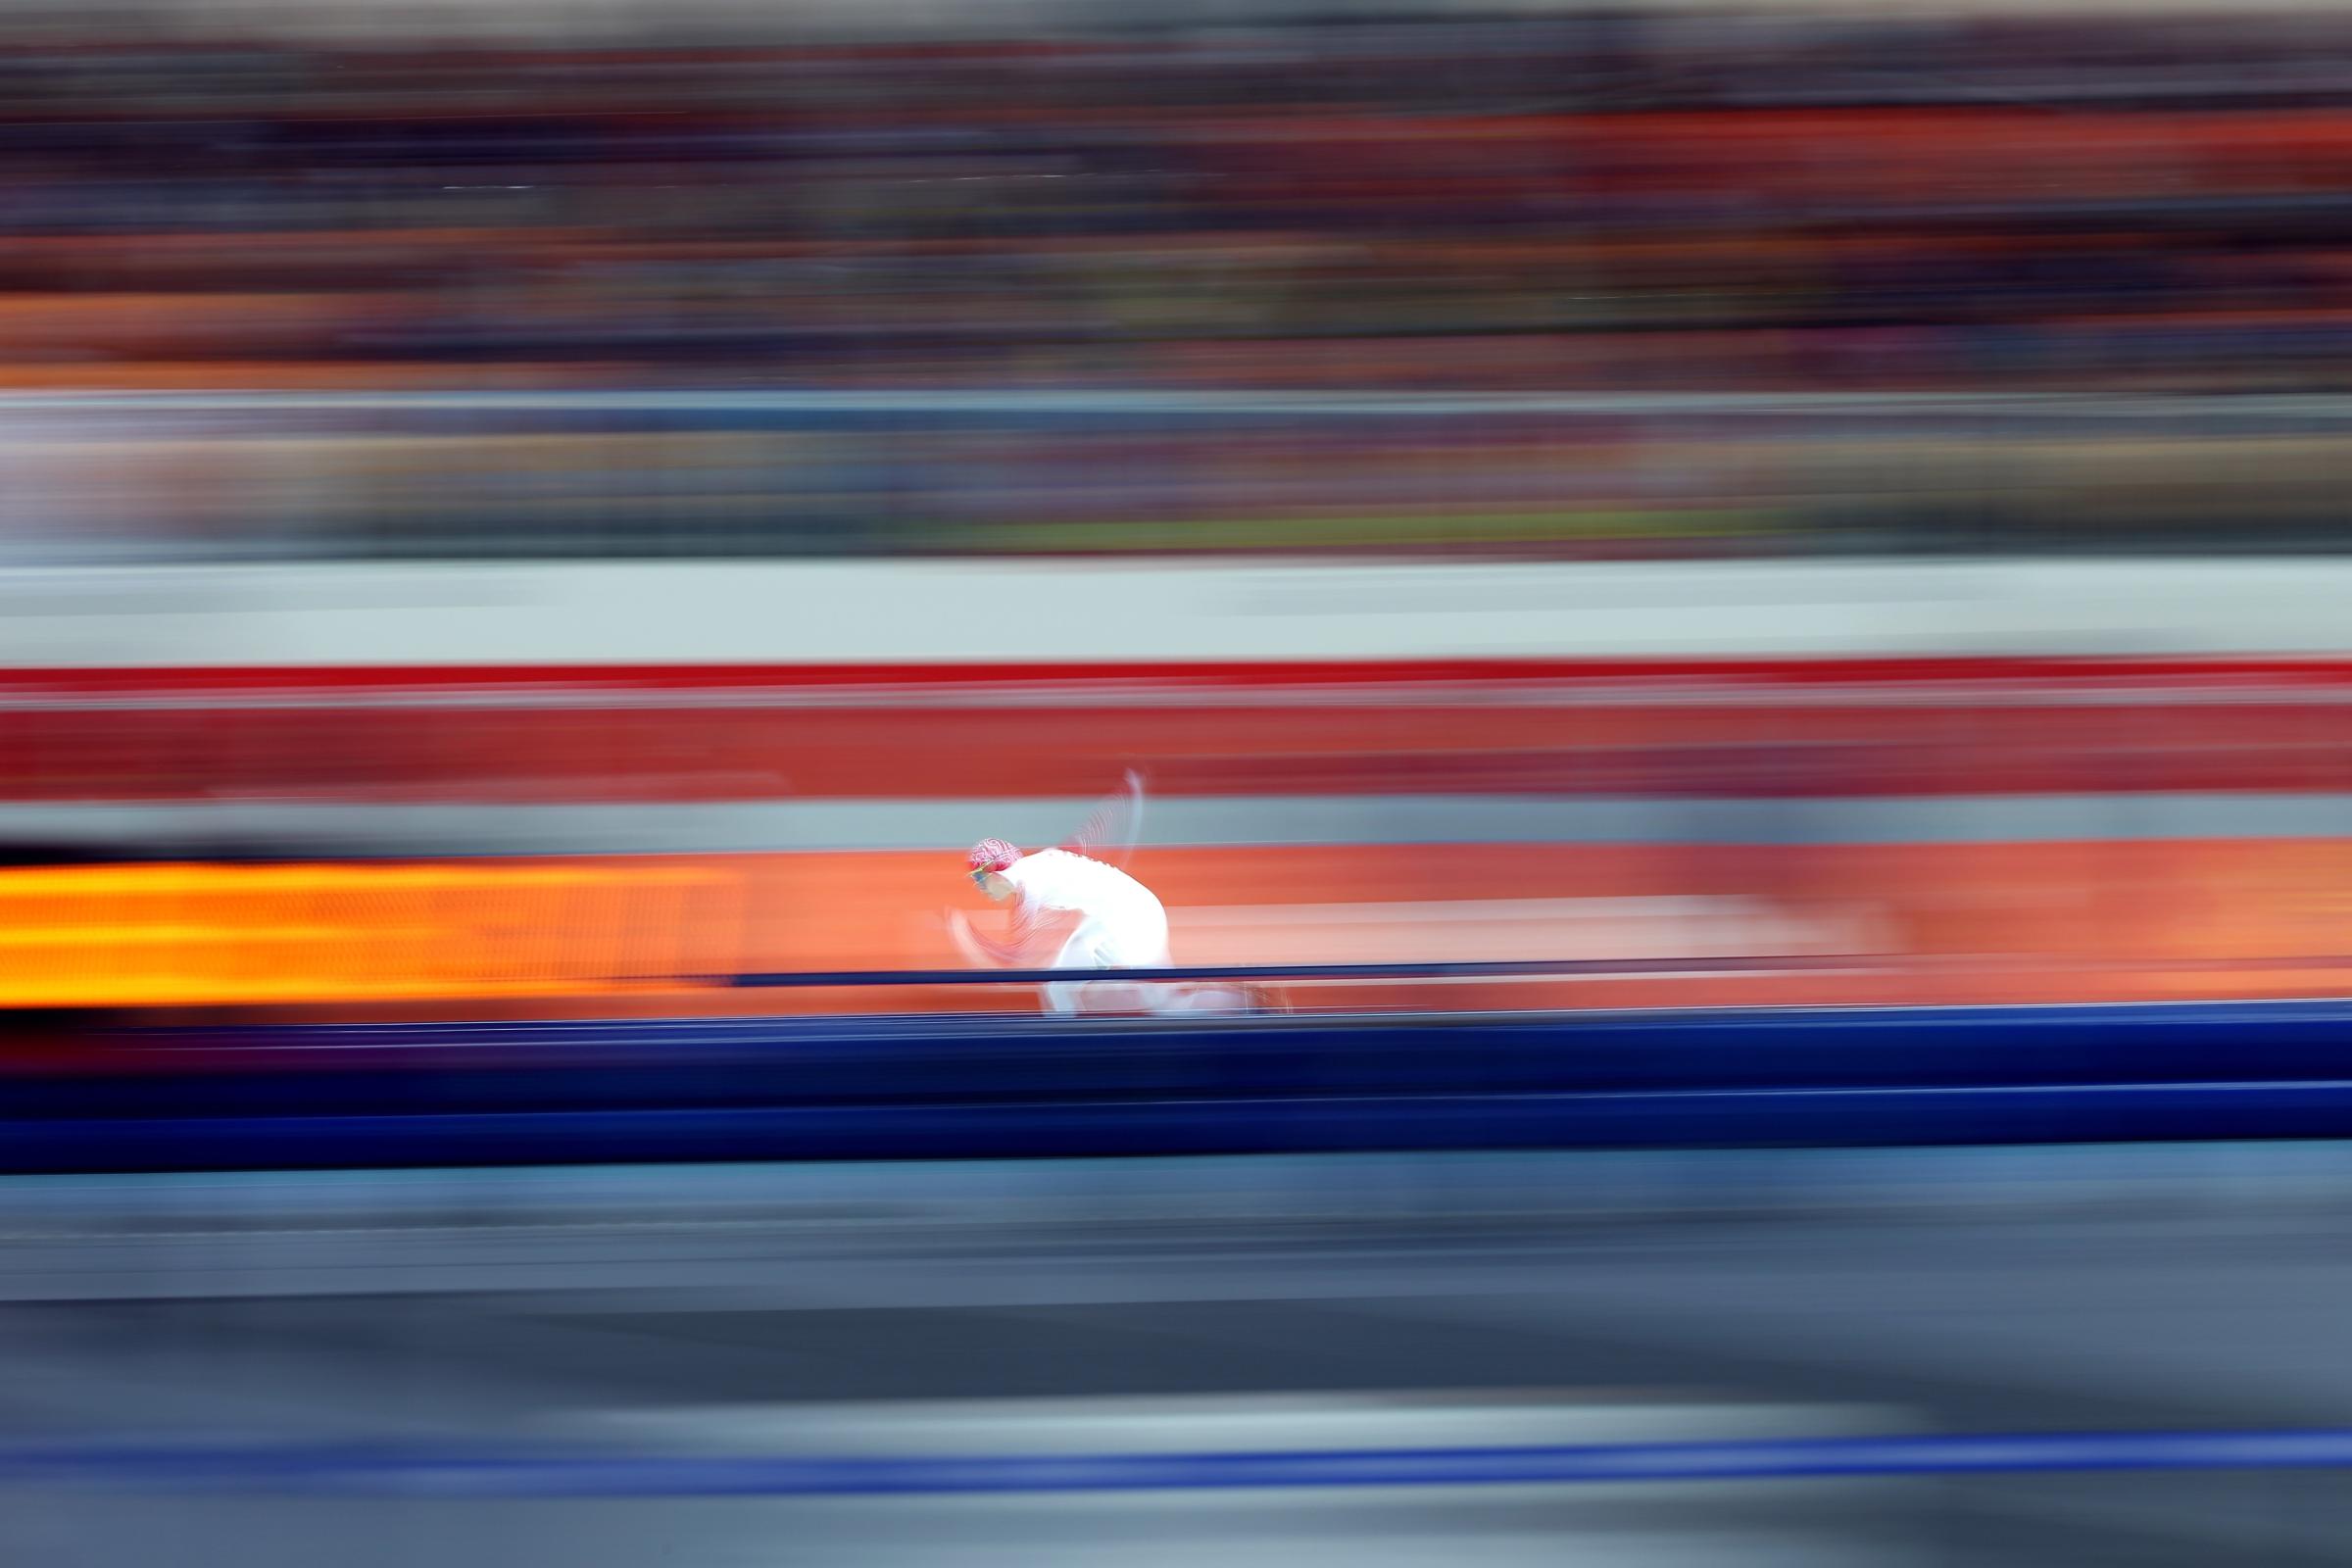 Angelina Golikova of Russia competes during the Speed Skating Women's 500m Run 1 of 2.